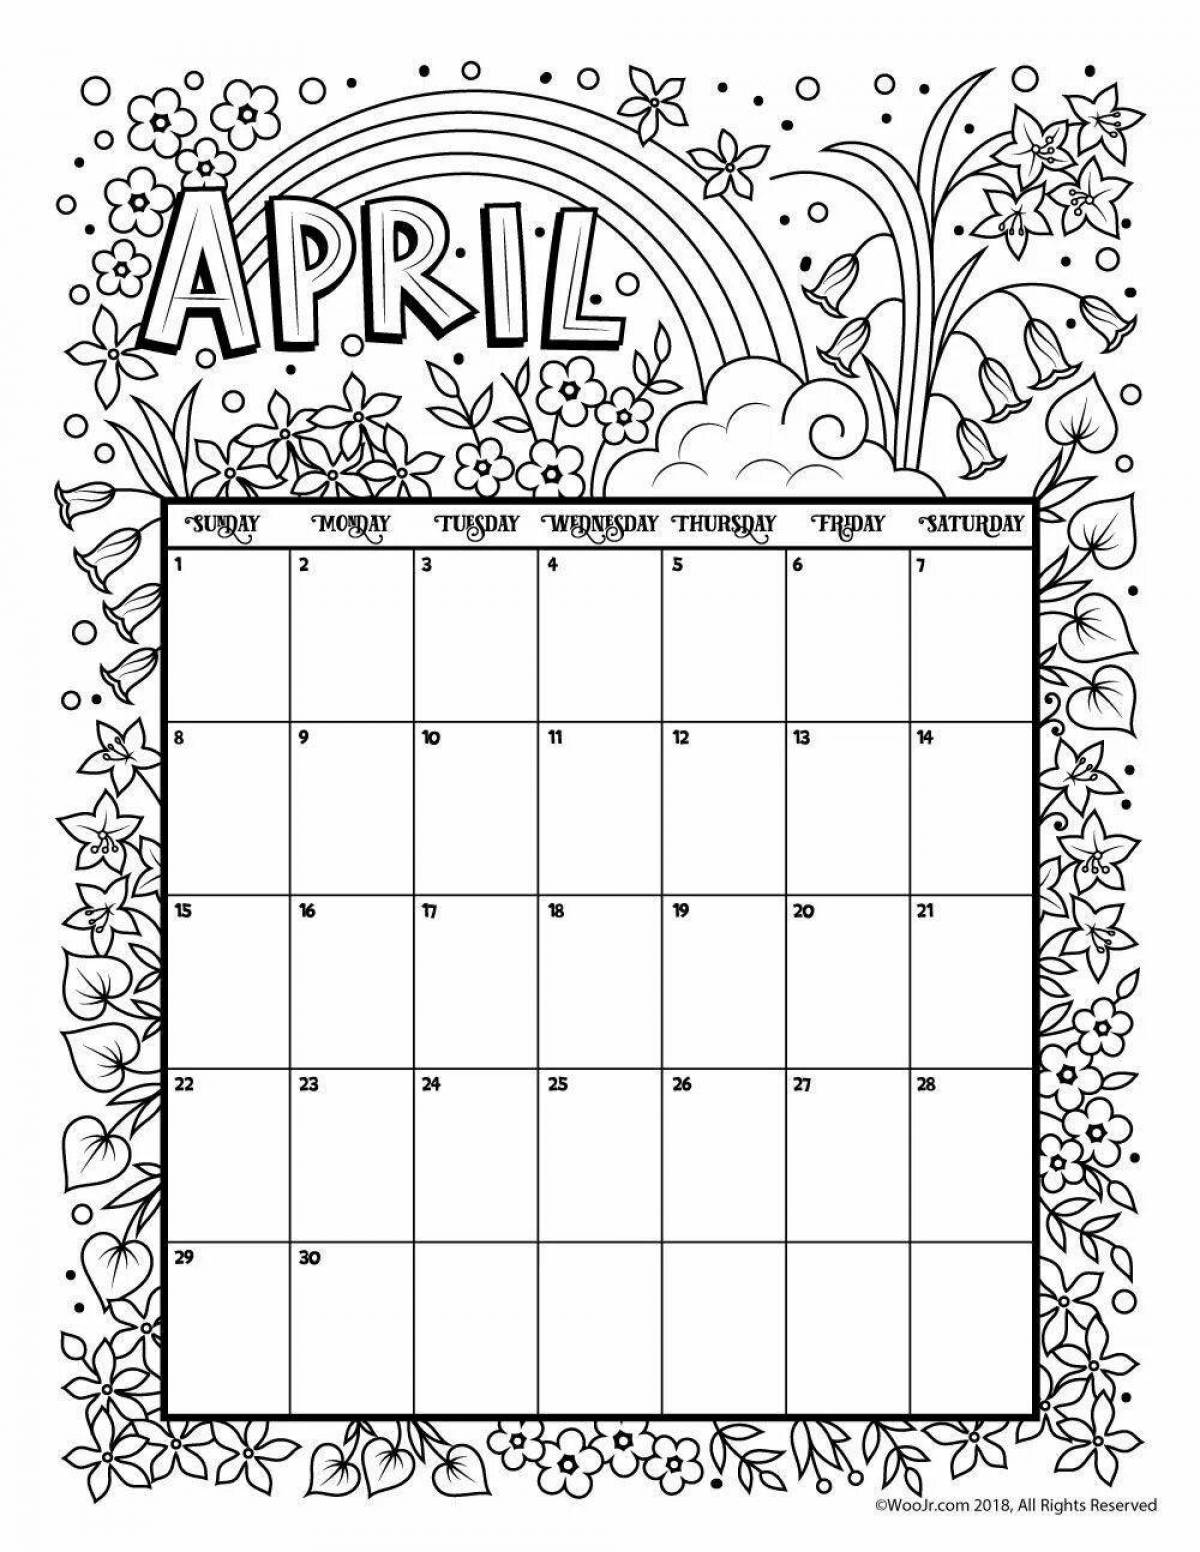 Fancy February coloring